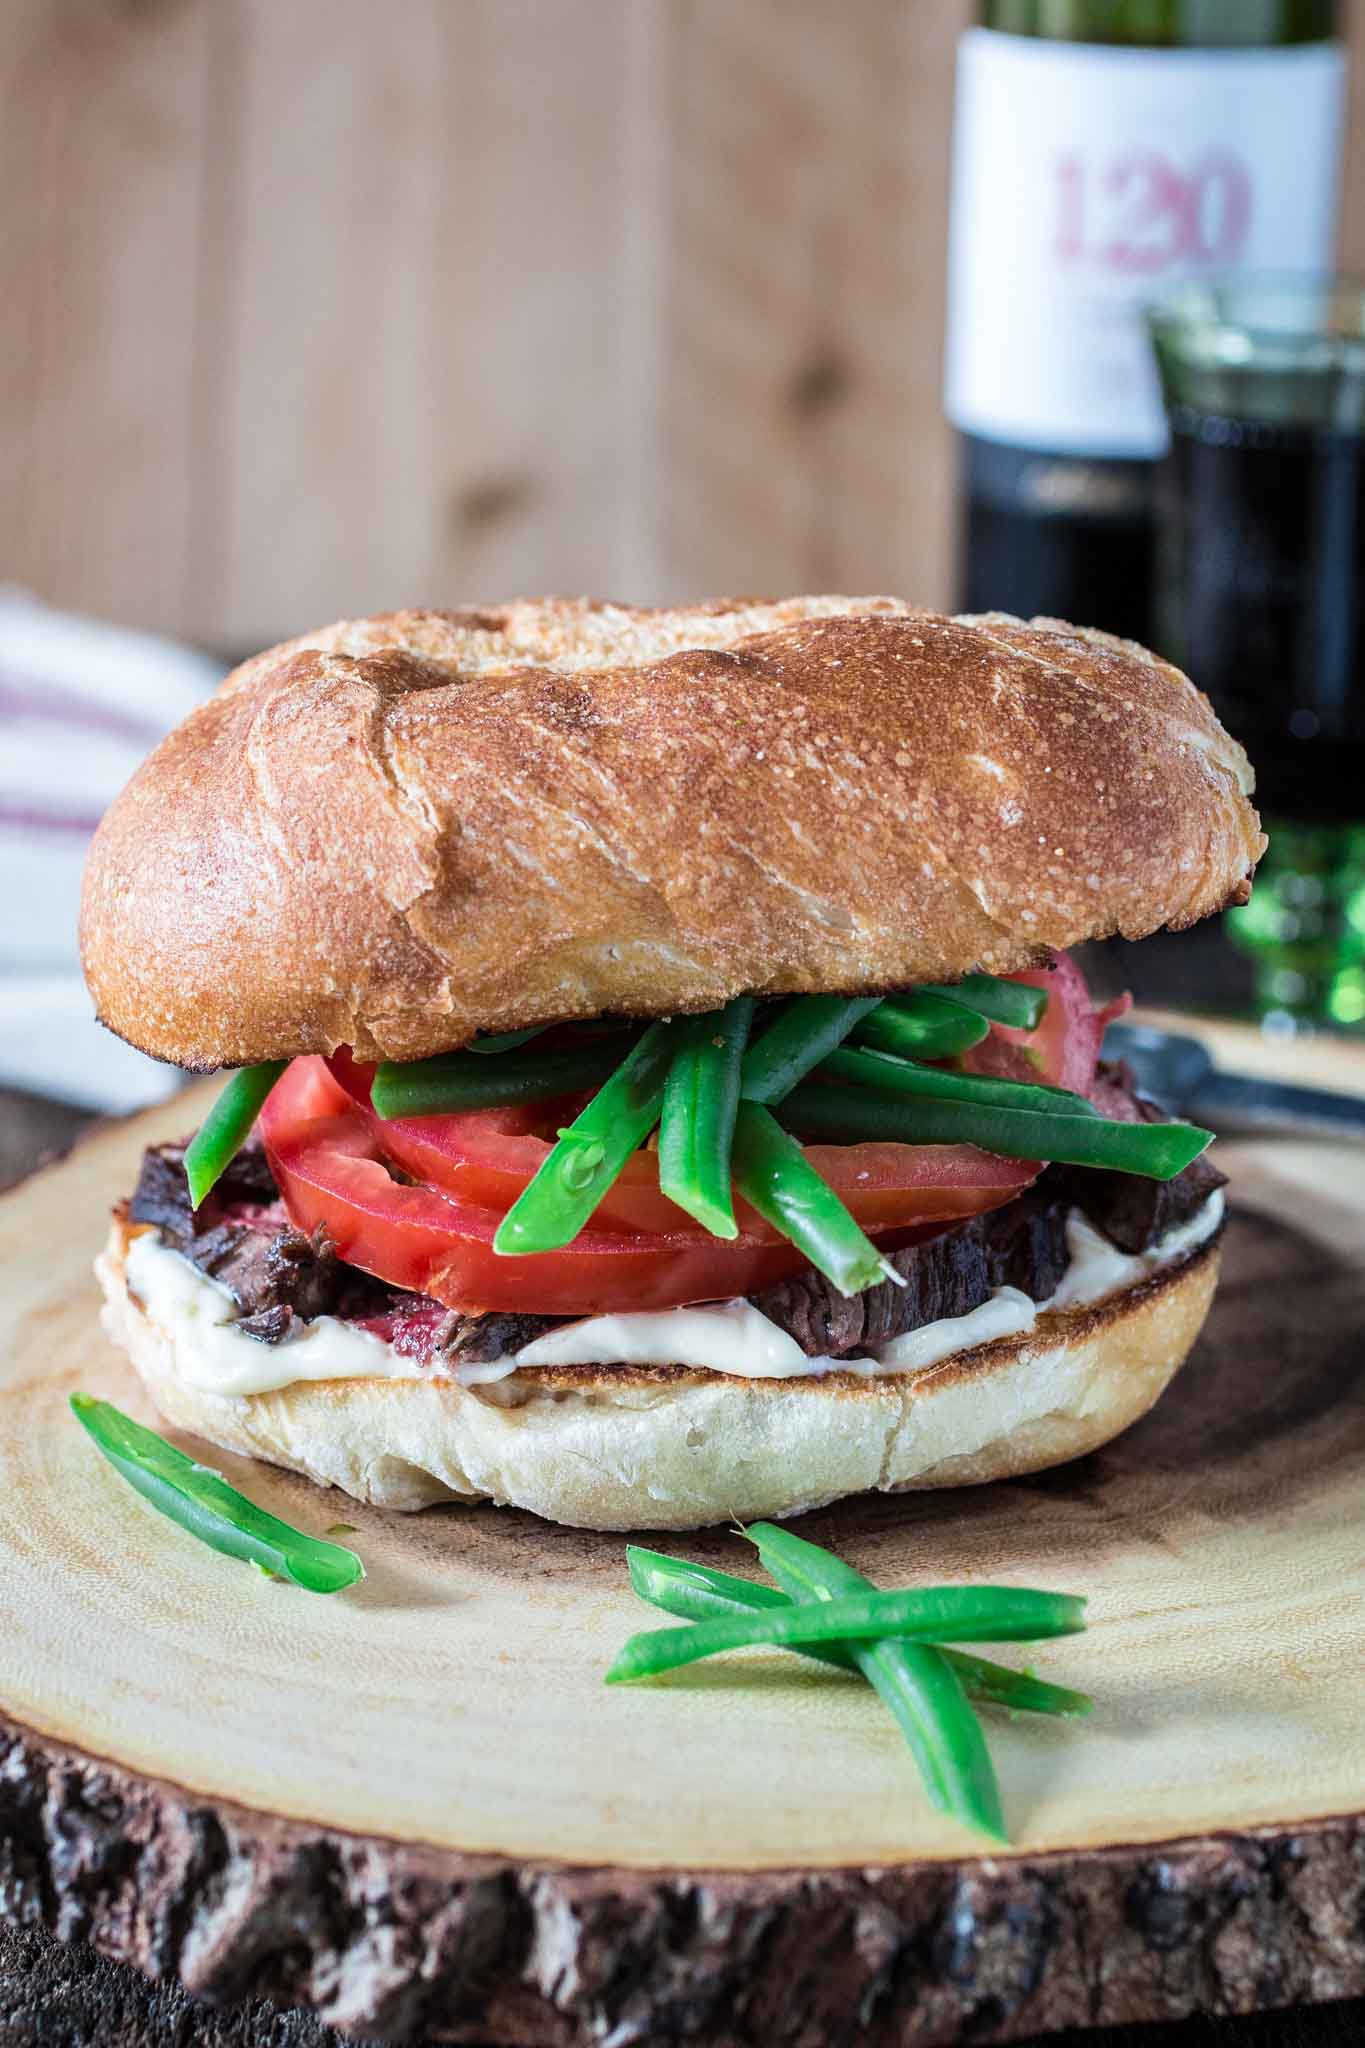 Chacarero (Chilean Steak Sandwich) | www.oliviascuisine.com | This is Chile's national sandwich. It consists of a roll piled high with grilled meat, tomatoes, a dollop of mayo, hot sauce and green beans! (Food styling and photography by Olivia Mesquita.)